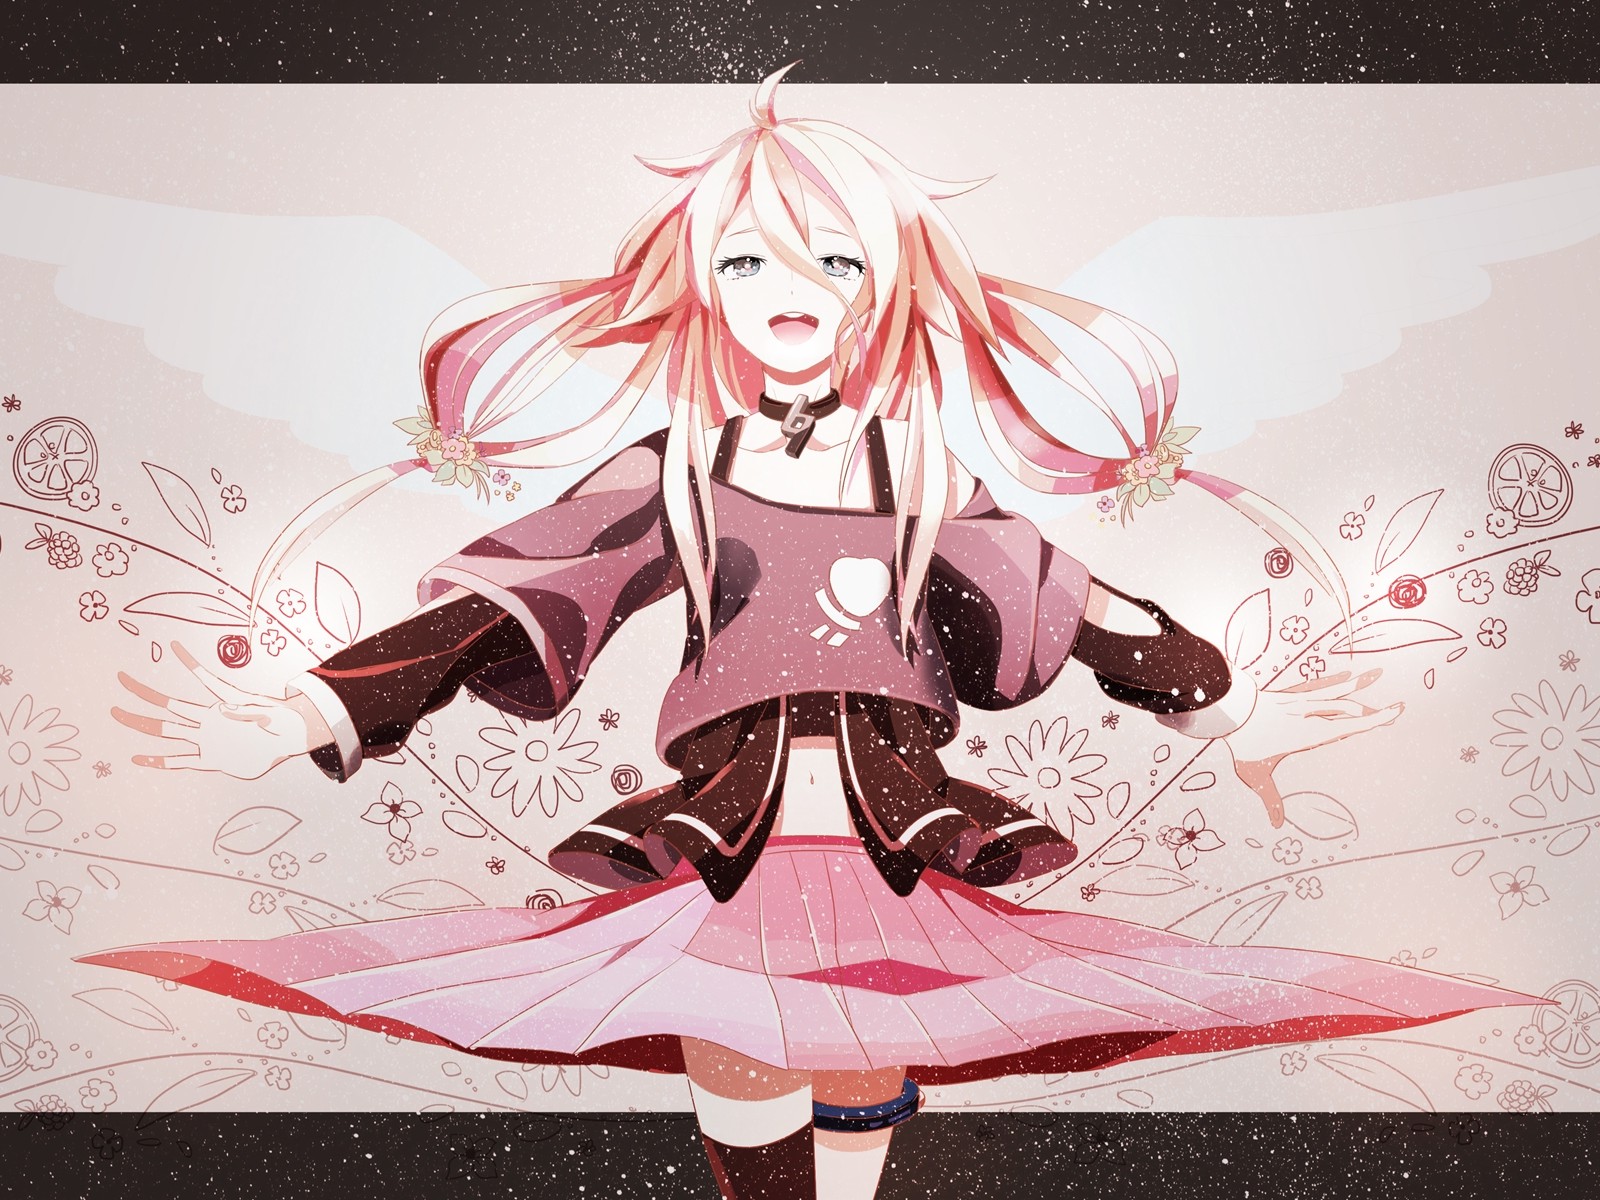 Ia 壁紙no 7 9 Vocaloid ボーカロイド 壁紙家